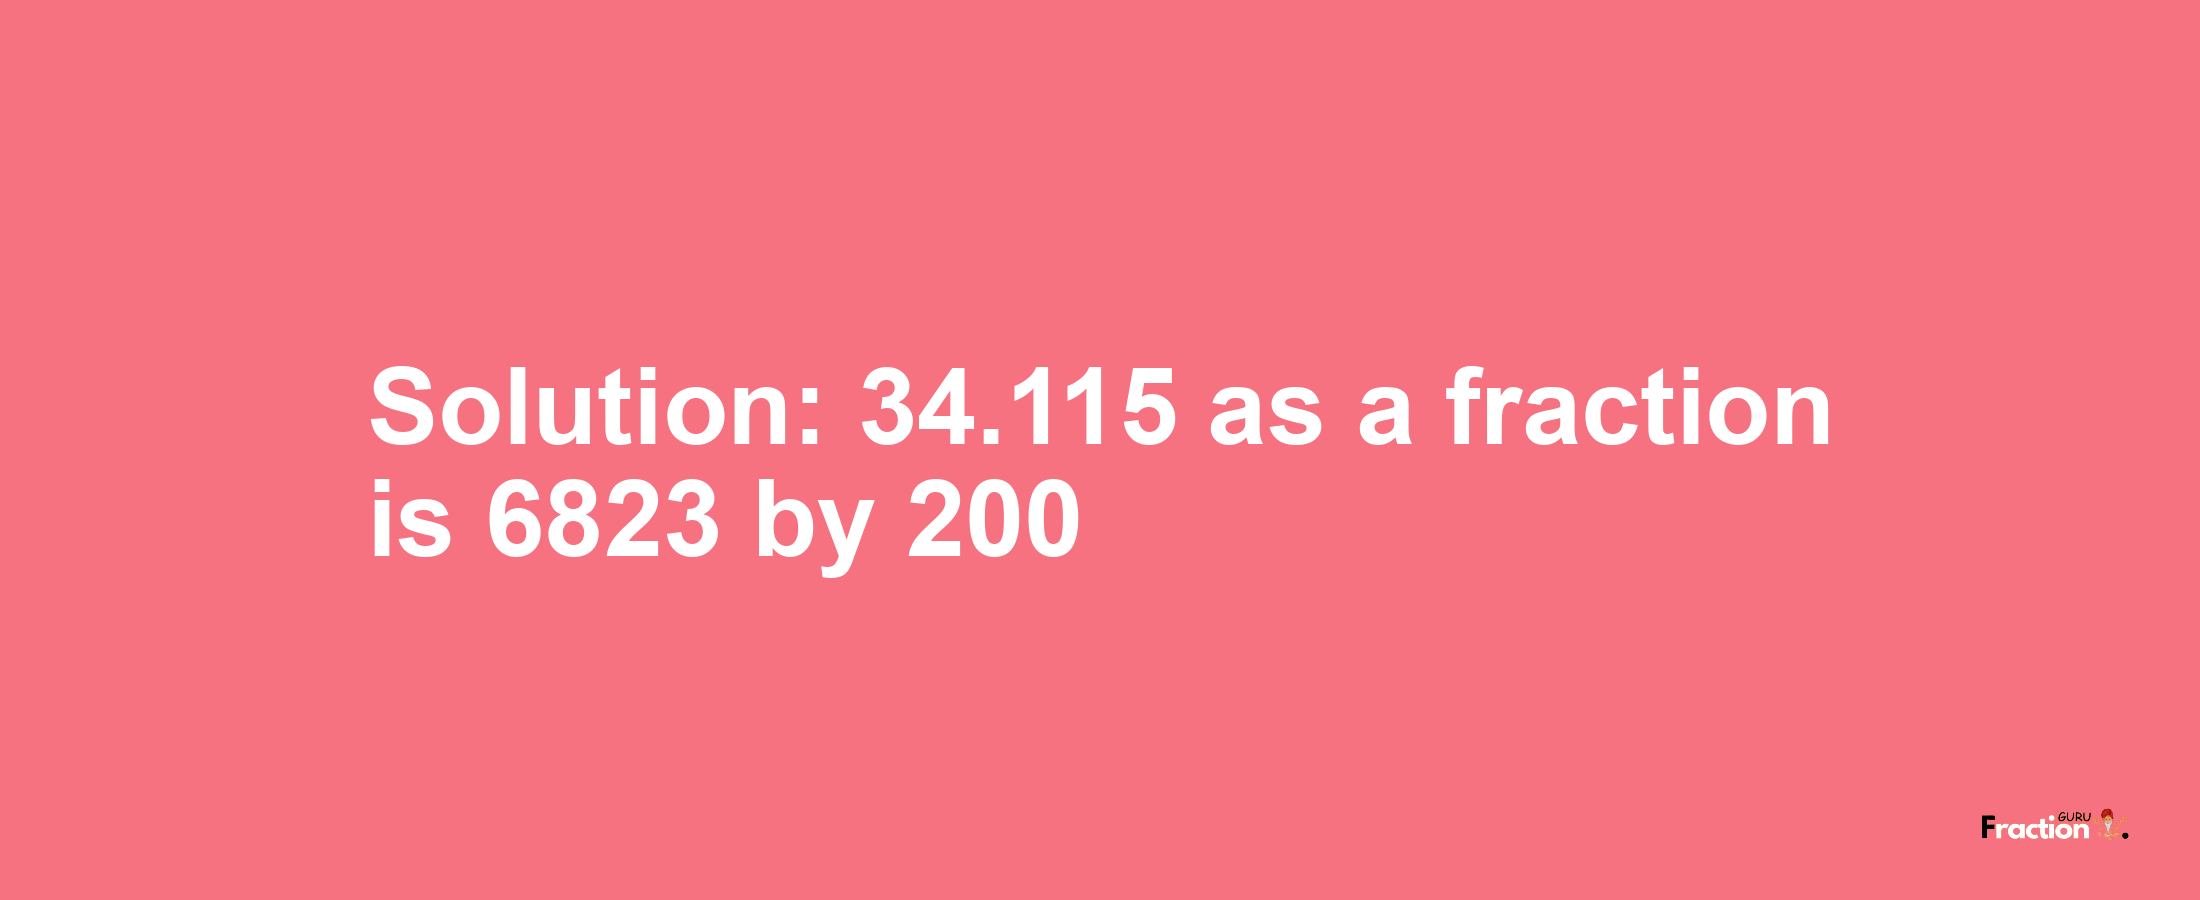 Solution:34.115 as a fraction is 6823/200